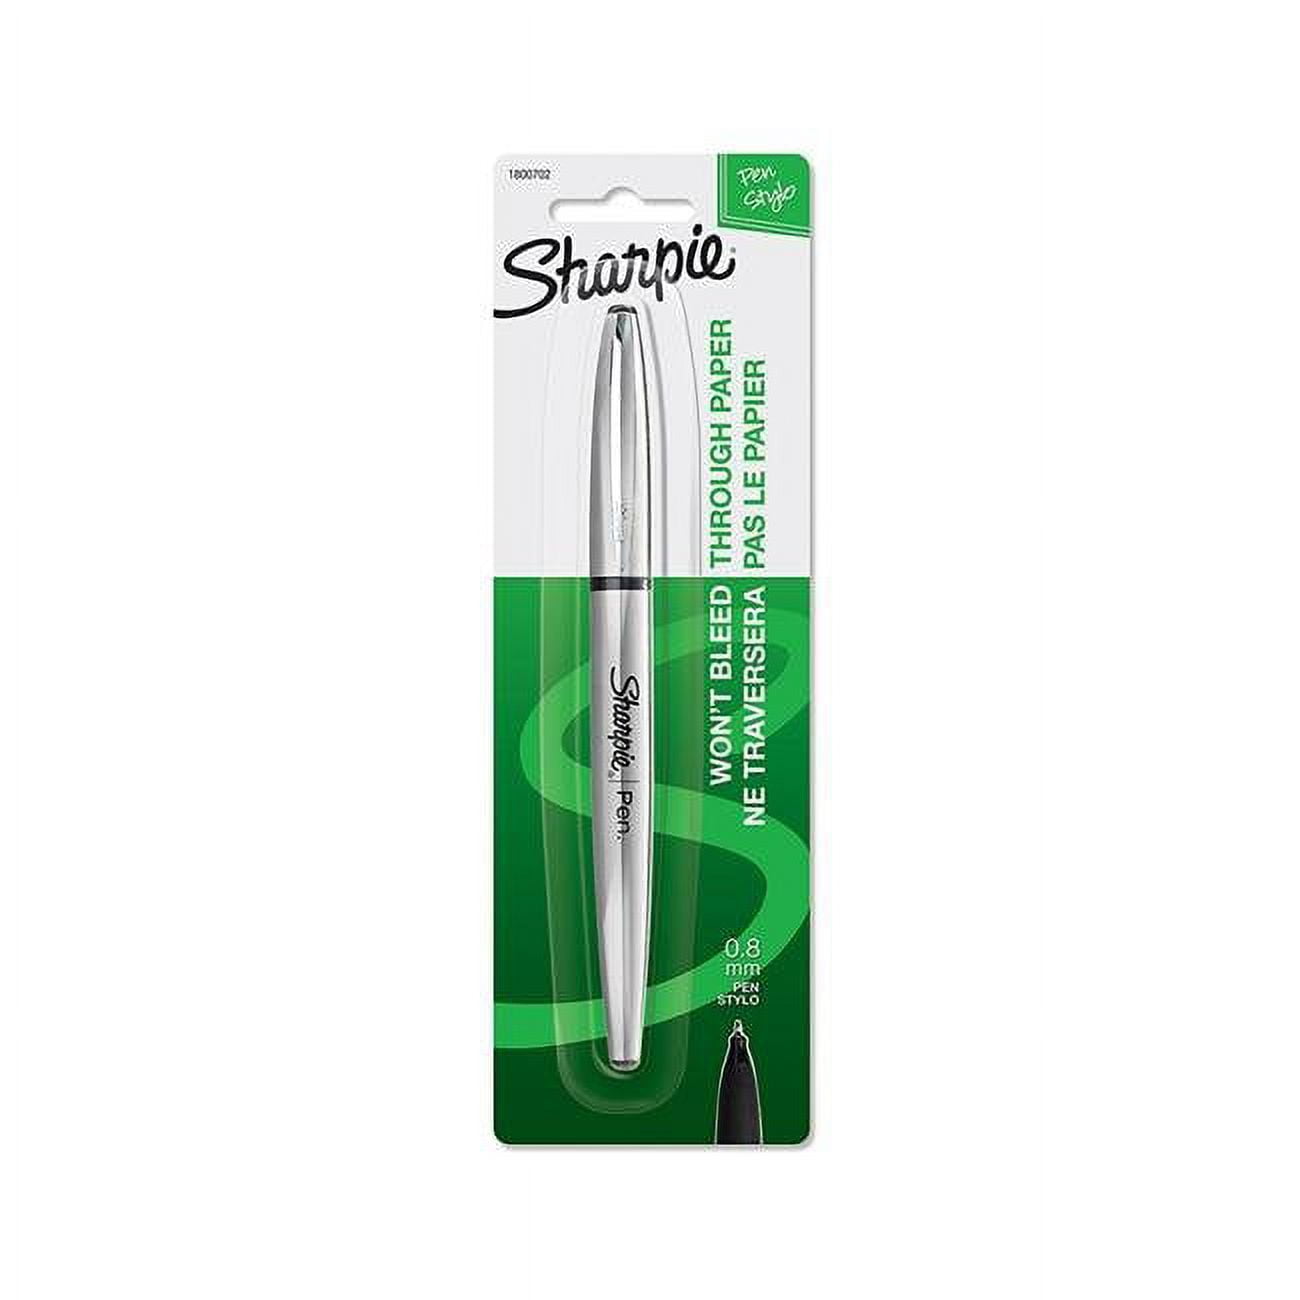 Promotional Sharpie Stainless Pens